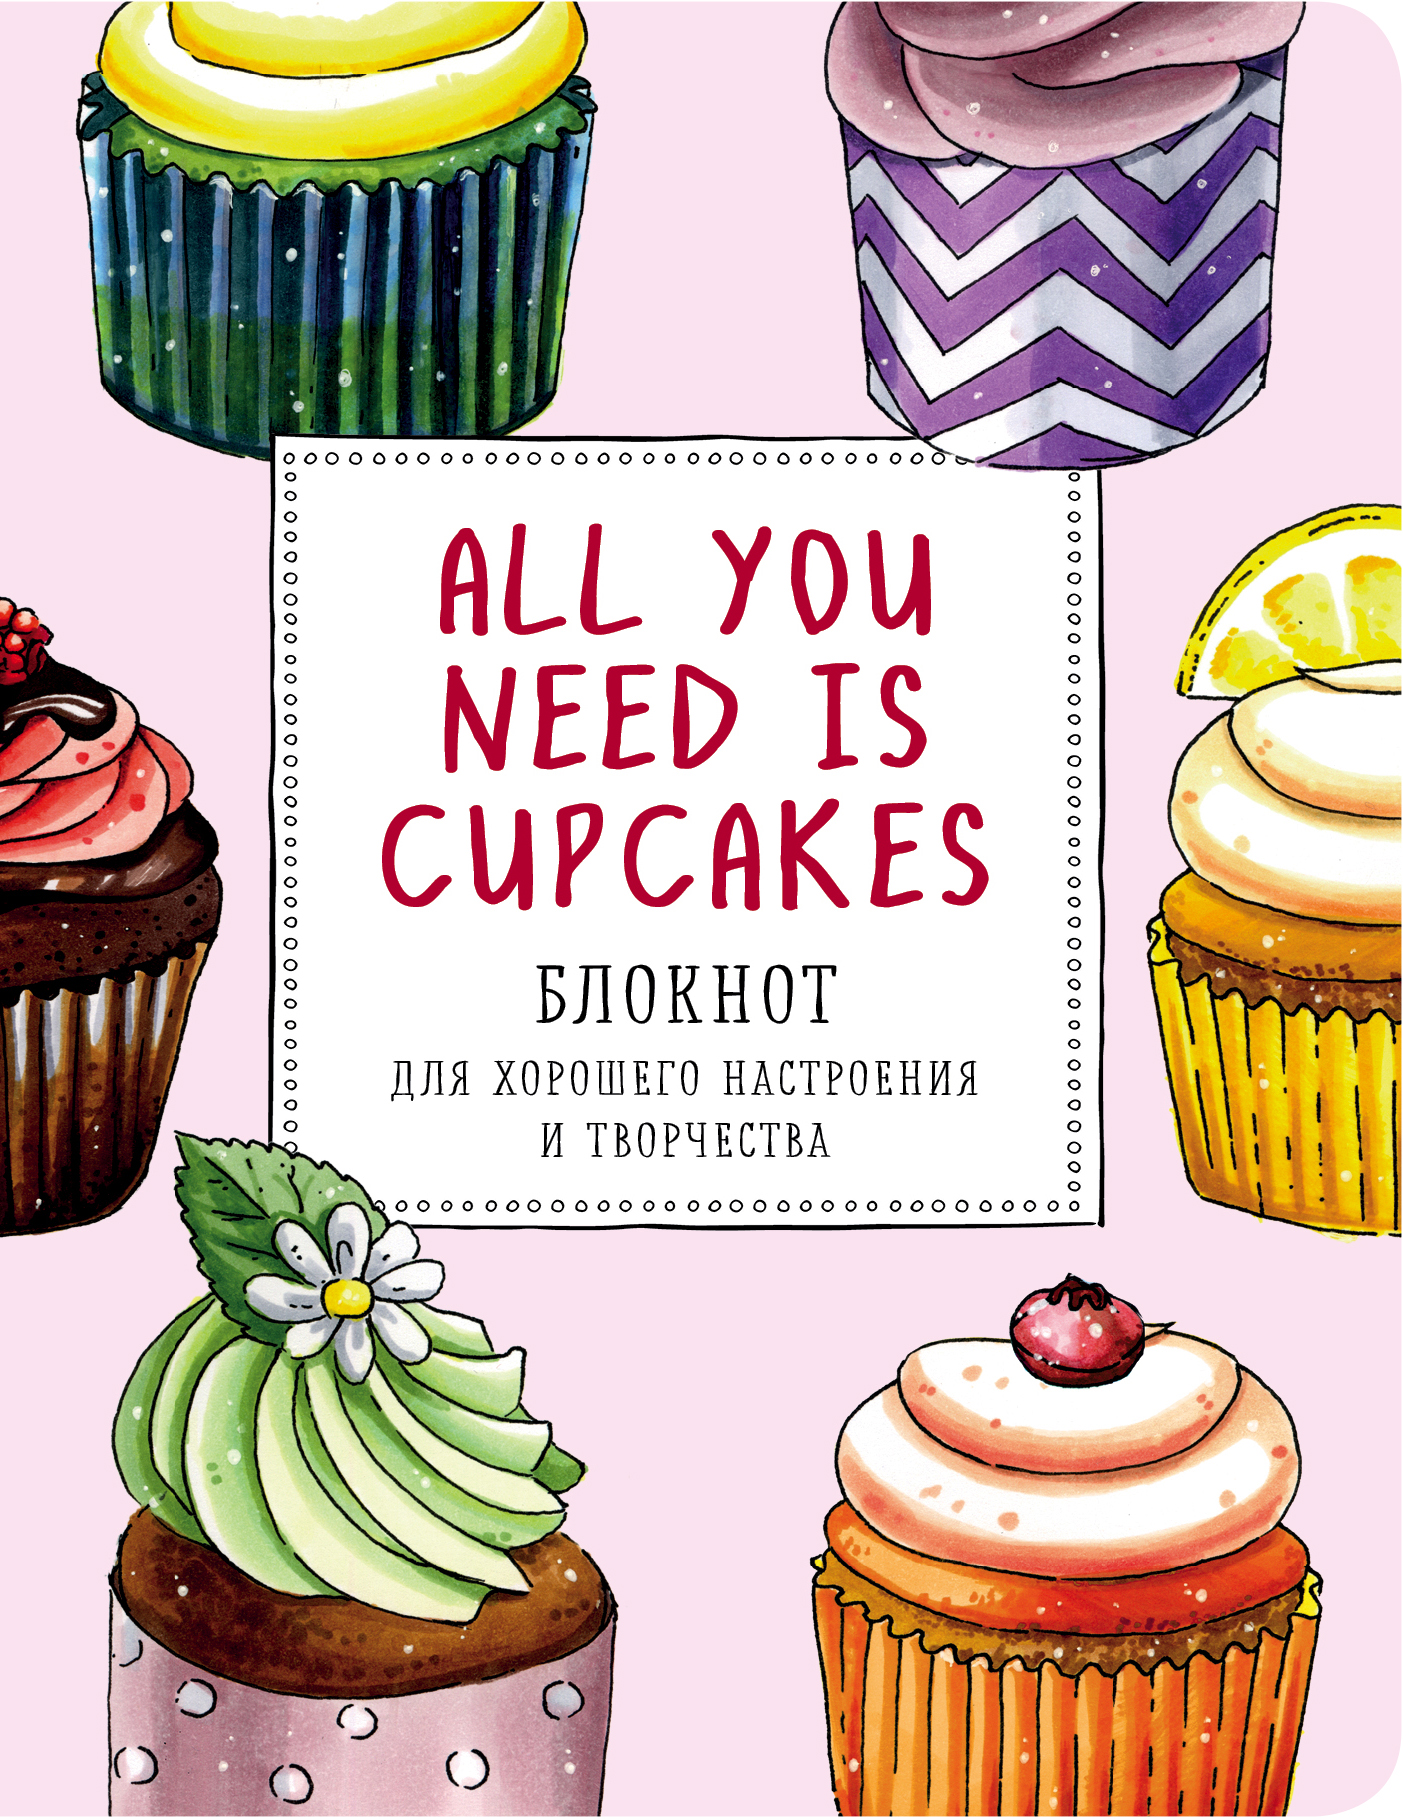 All you need is cupcakes.    